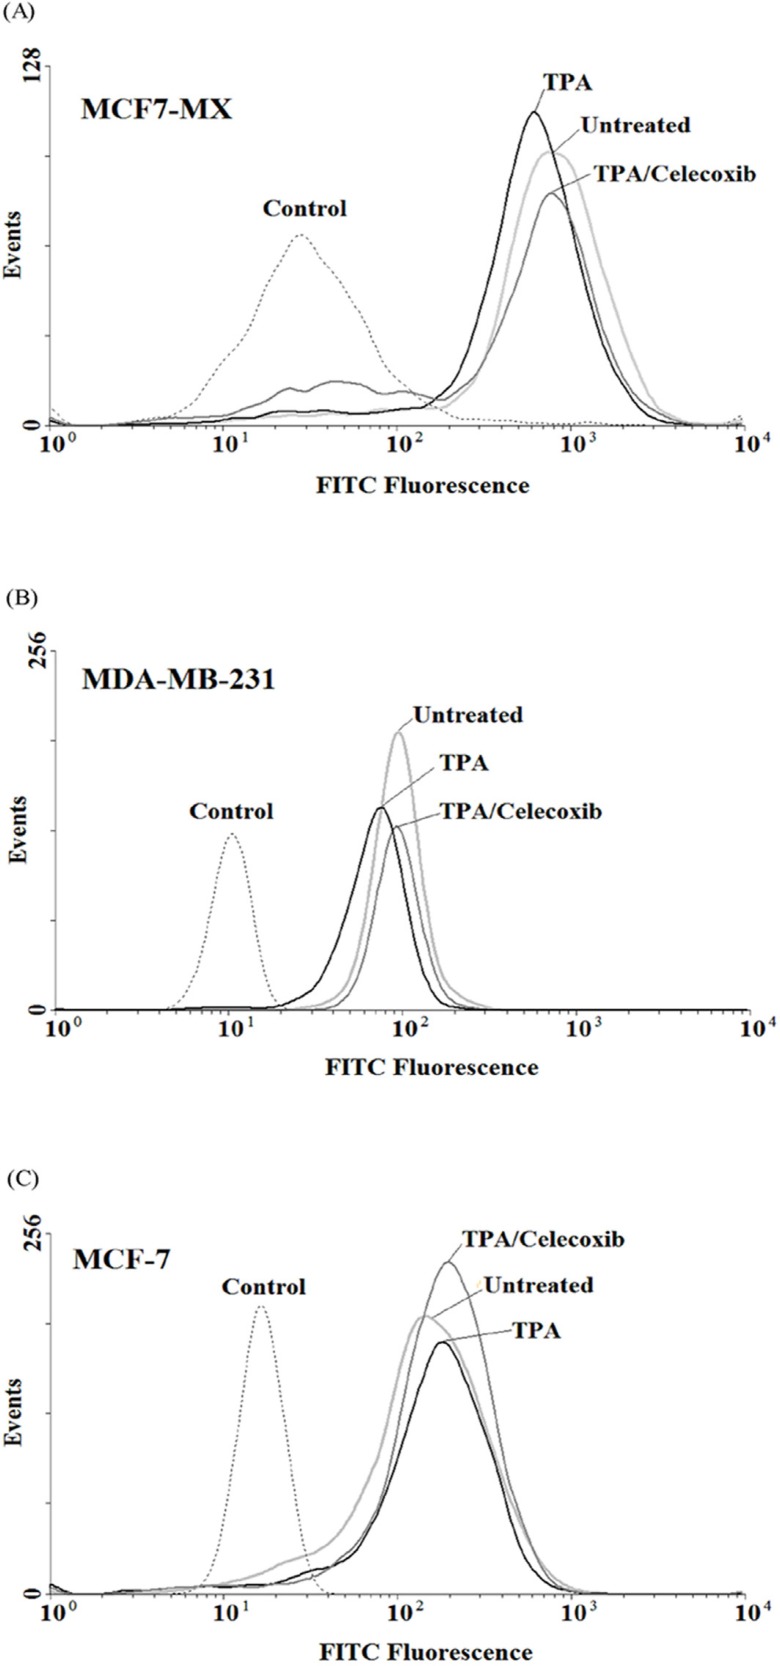 Effects of celecoxib on the expression of ABCG2 at protein levels in MCF7-MX (A), MDA-MB-231 (B), and MCF-7 (C) cell lines were studied by flow cytometry. Cells were fixed and permeabilized by formaldehyde and methanol, blocked with BSA and then incubated with primary monoclonal antibody BXP-21. After washing, Cells were incubated with a FITC-conjugated goat anti-mouse antibody. Fluorescence of 10,000 cells was quantified from histogram plots using the mean fluorescence intensity (MFI). Each histogram shows the overlay of the TPA treated sample (black), TPA and celecoxib treated sample (dark gray), untreated sample (ligh gray) and secondary antibody as negative control (broken light gray).